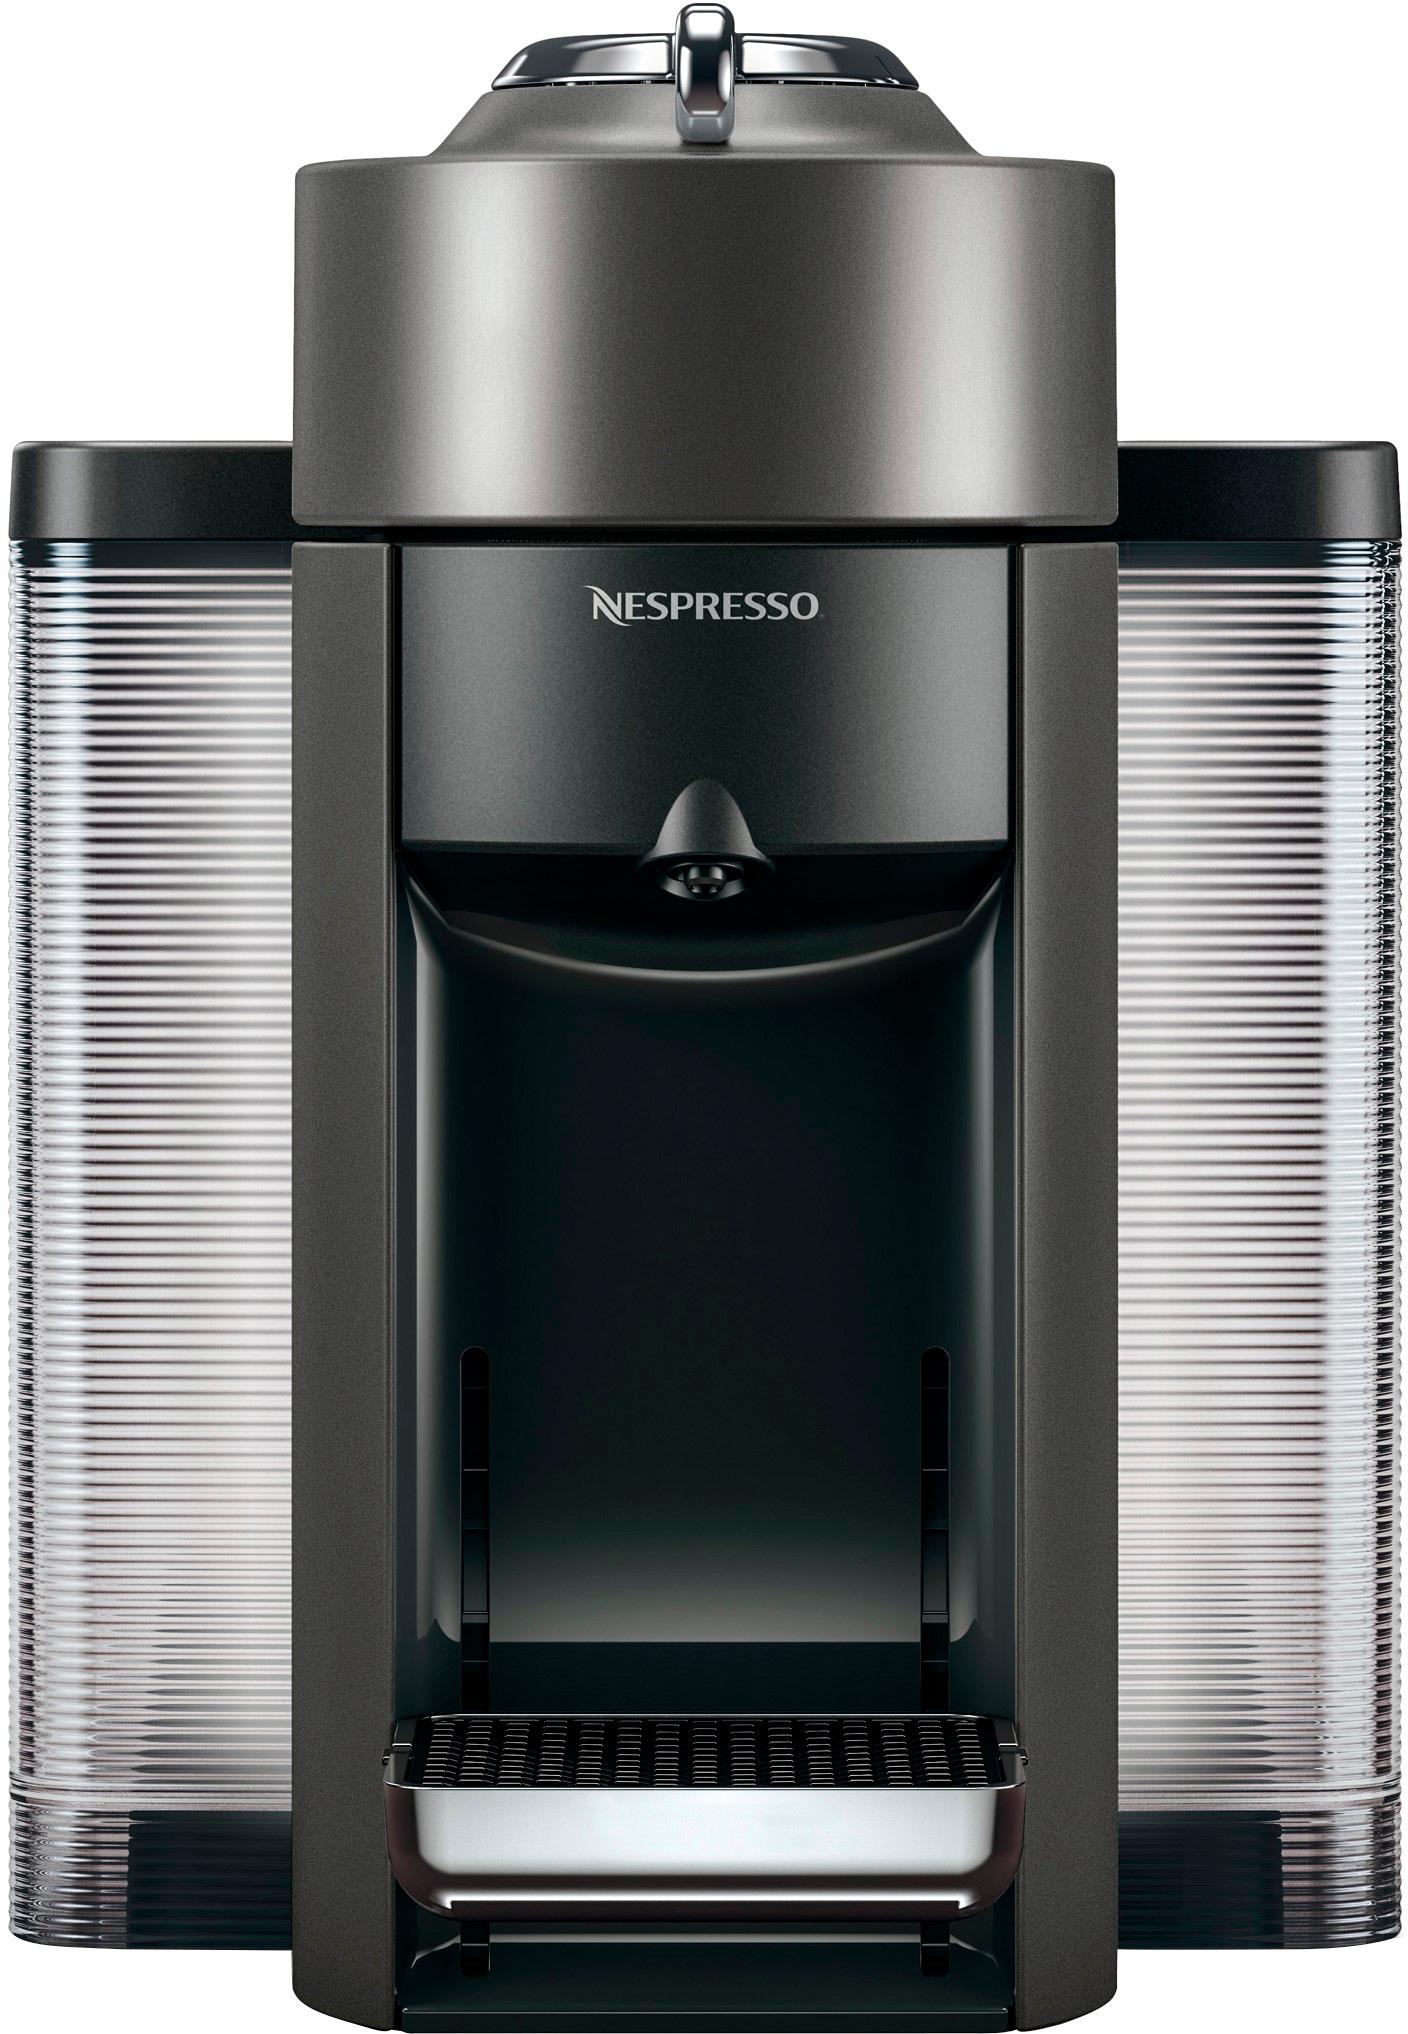 Nespresso Vertuo Coffee Maker And Espresso Machine With Aeroccino Milk Frother By Delonghi Graphite Metal Env135gyae Best Buy,Fried Dumplings Drawing